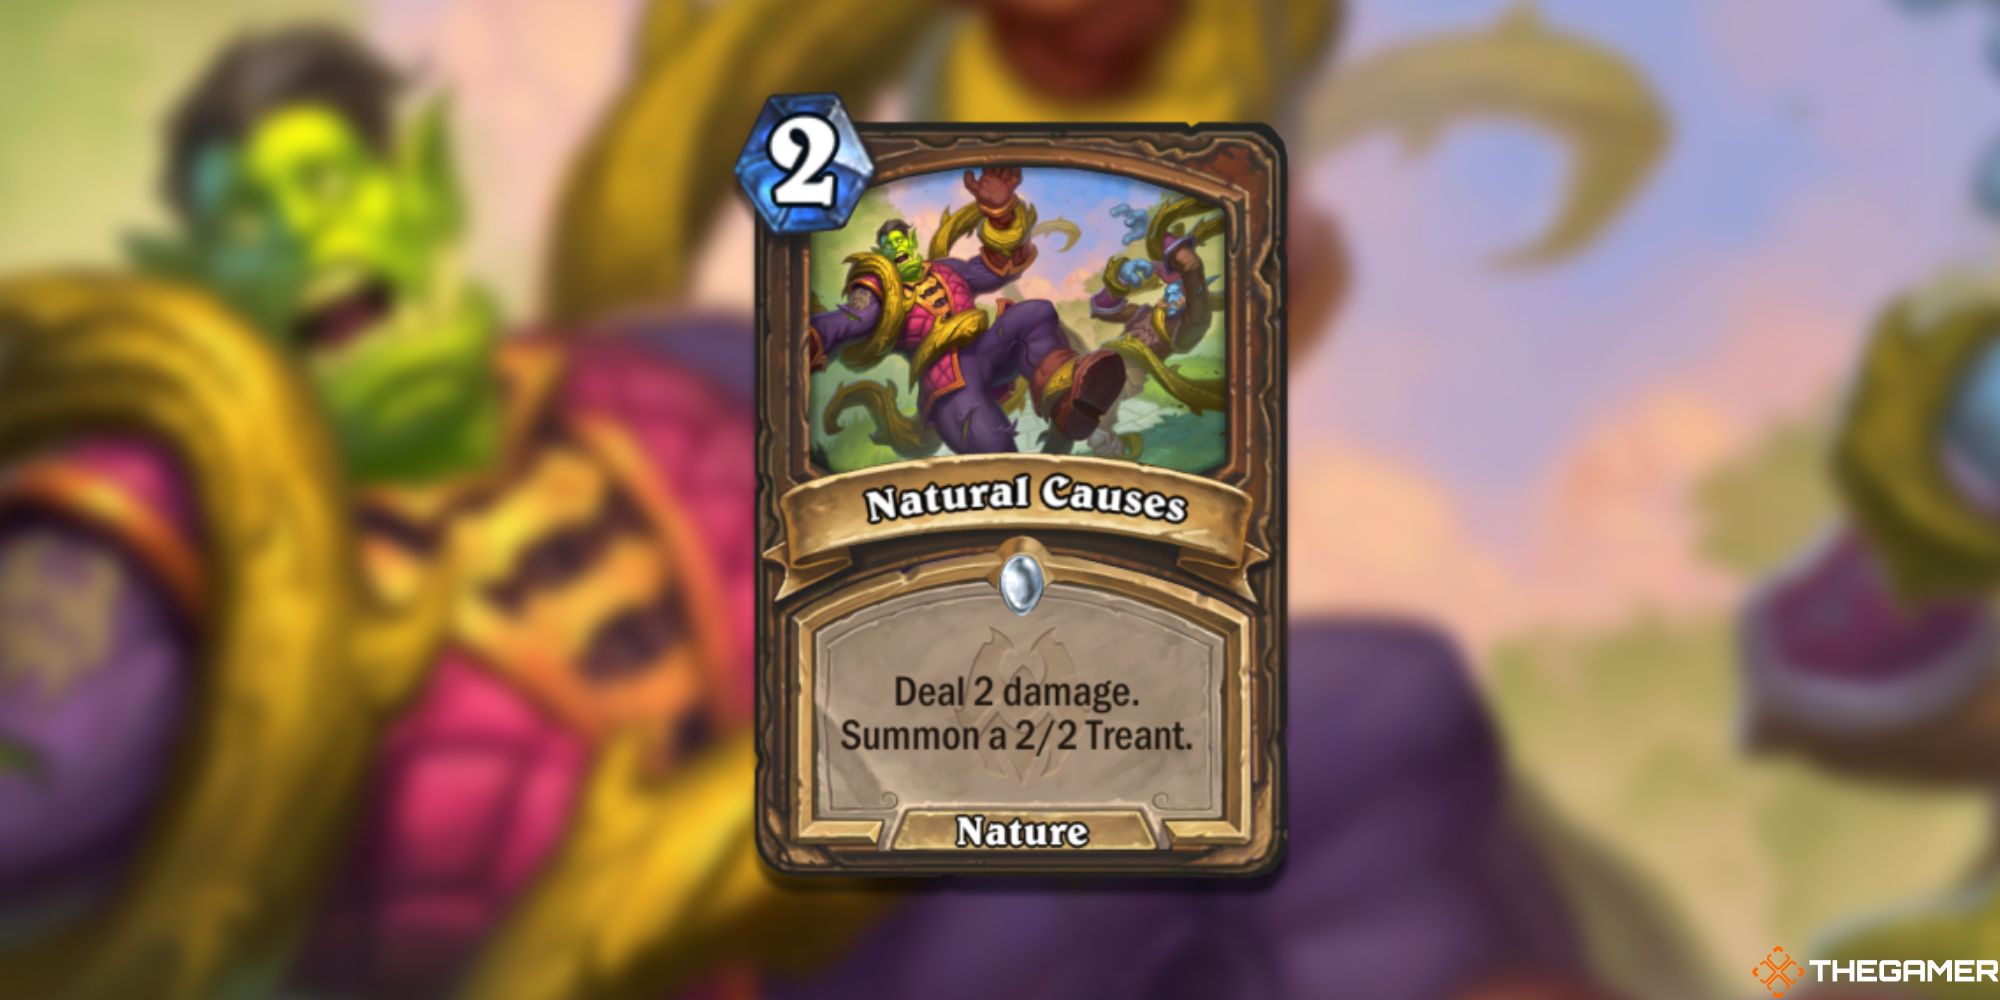 Natural Causes Hearthstone Card